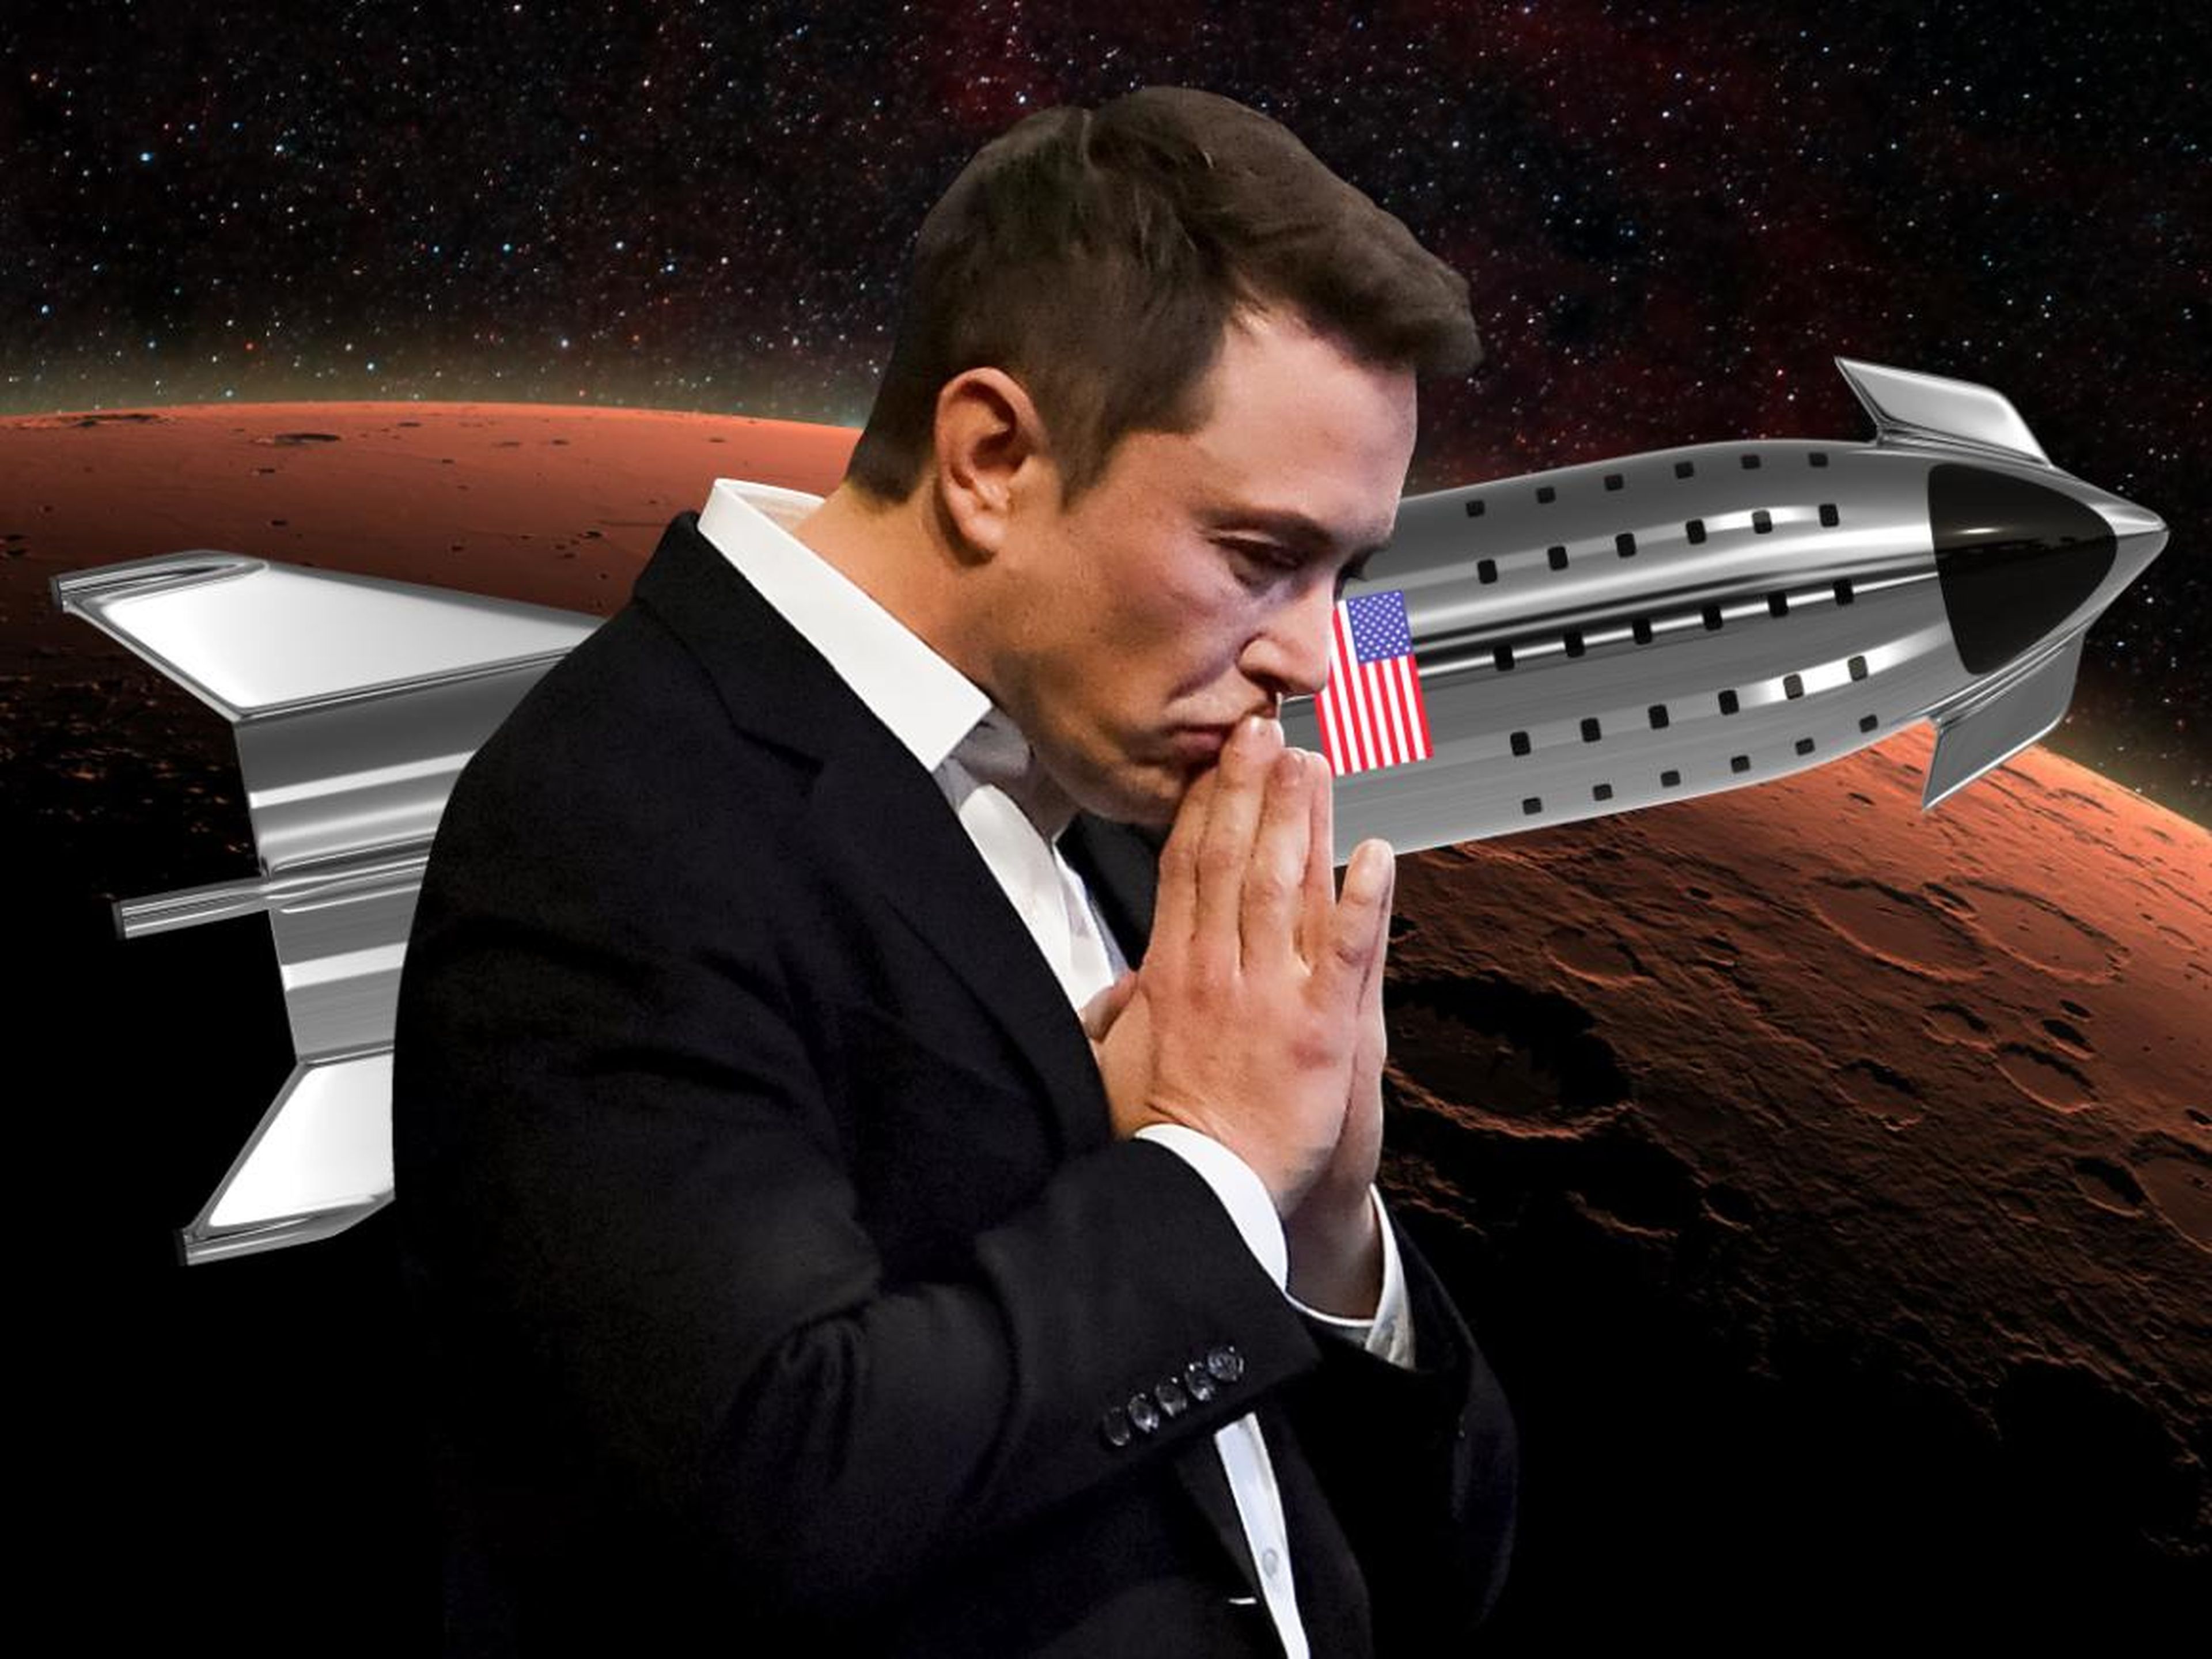 Elon Musk and SpaceX are developing a steel Mars rocket system called Starship.